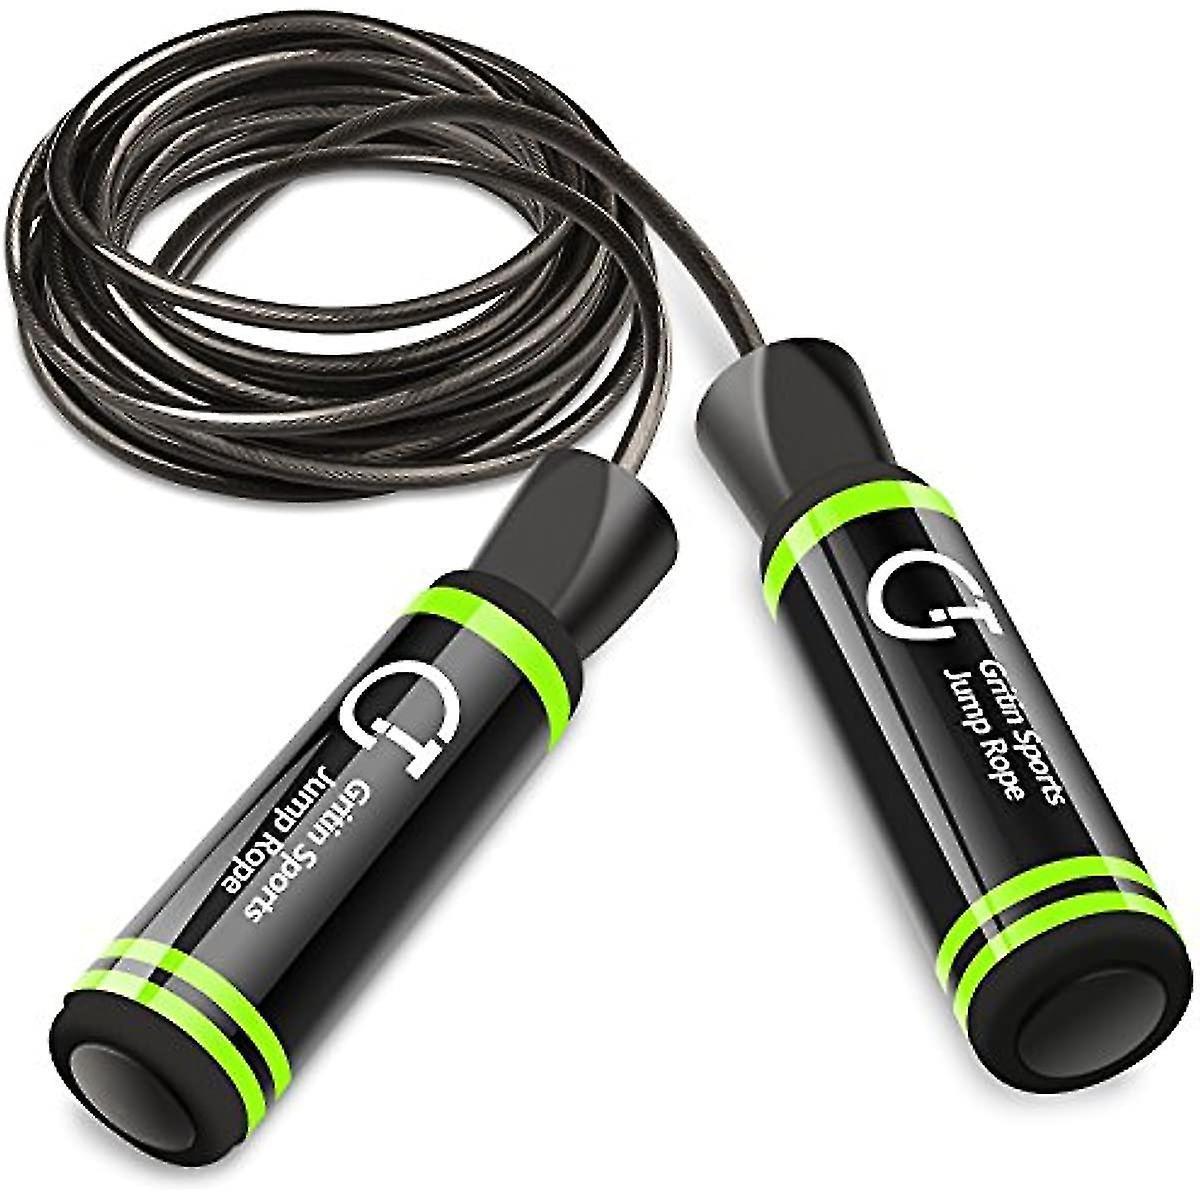 Skipping Rope Speed Jump Rope Soft Memory Foam Handle Tangle-free Adjustable Rope&rapid Ball Bearings Fitness Workouts Fat Burning Exercises B